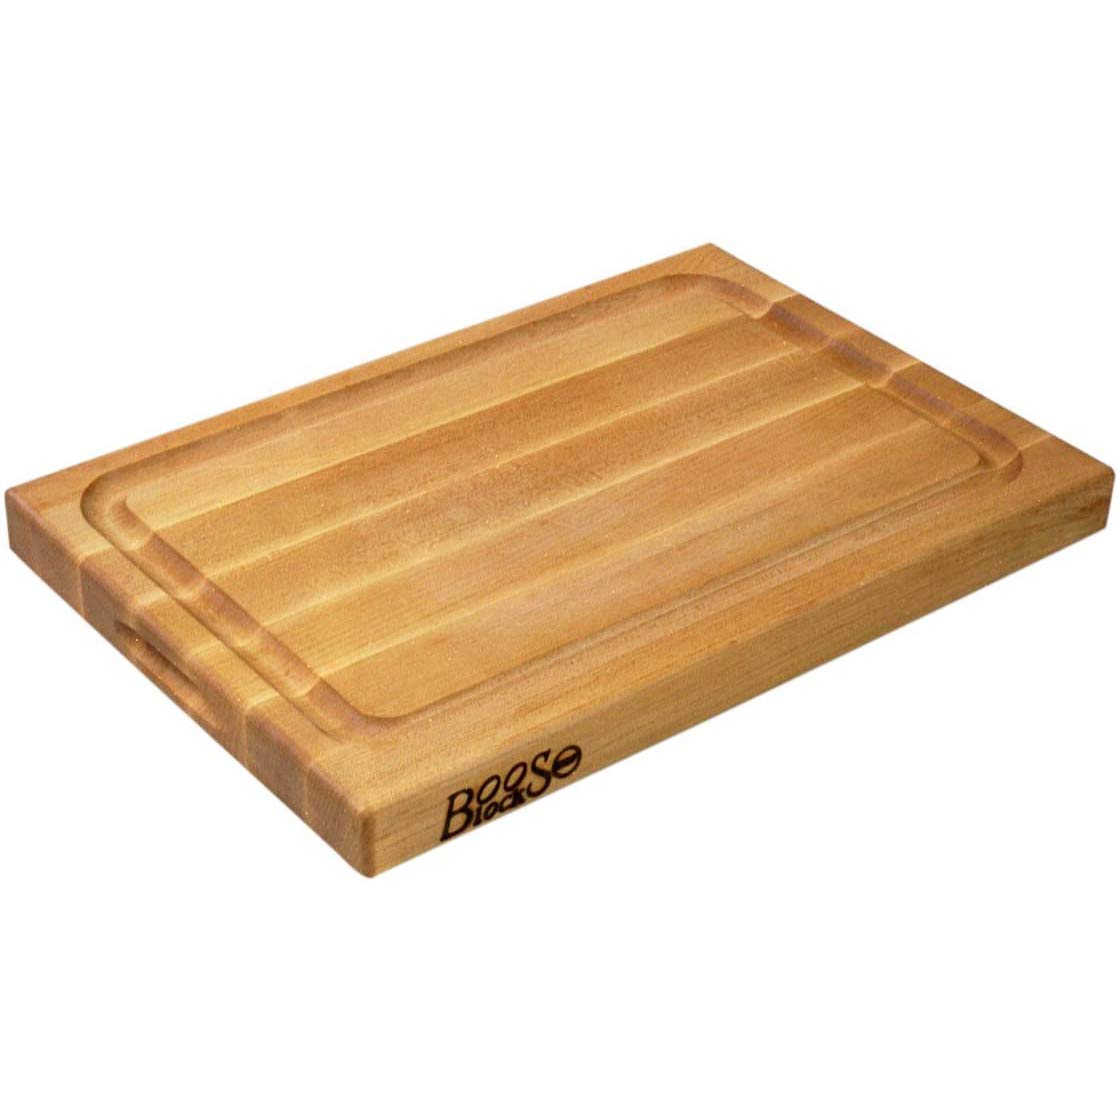 John Boos BBQBD Large Maple Wood Cutting Board for Kitchen Prep, 18” x 12” 1.5” Thick, Hand Grip, Juice Groove, Charcuterie, Reversible Block 18X12X1.5 MPL-EDGE GR-REV-GRV-GRIPS